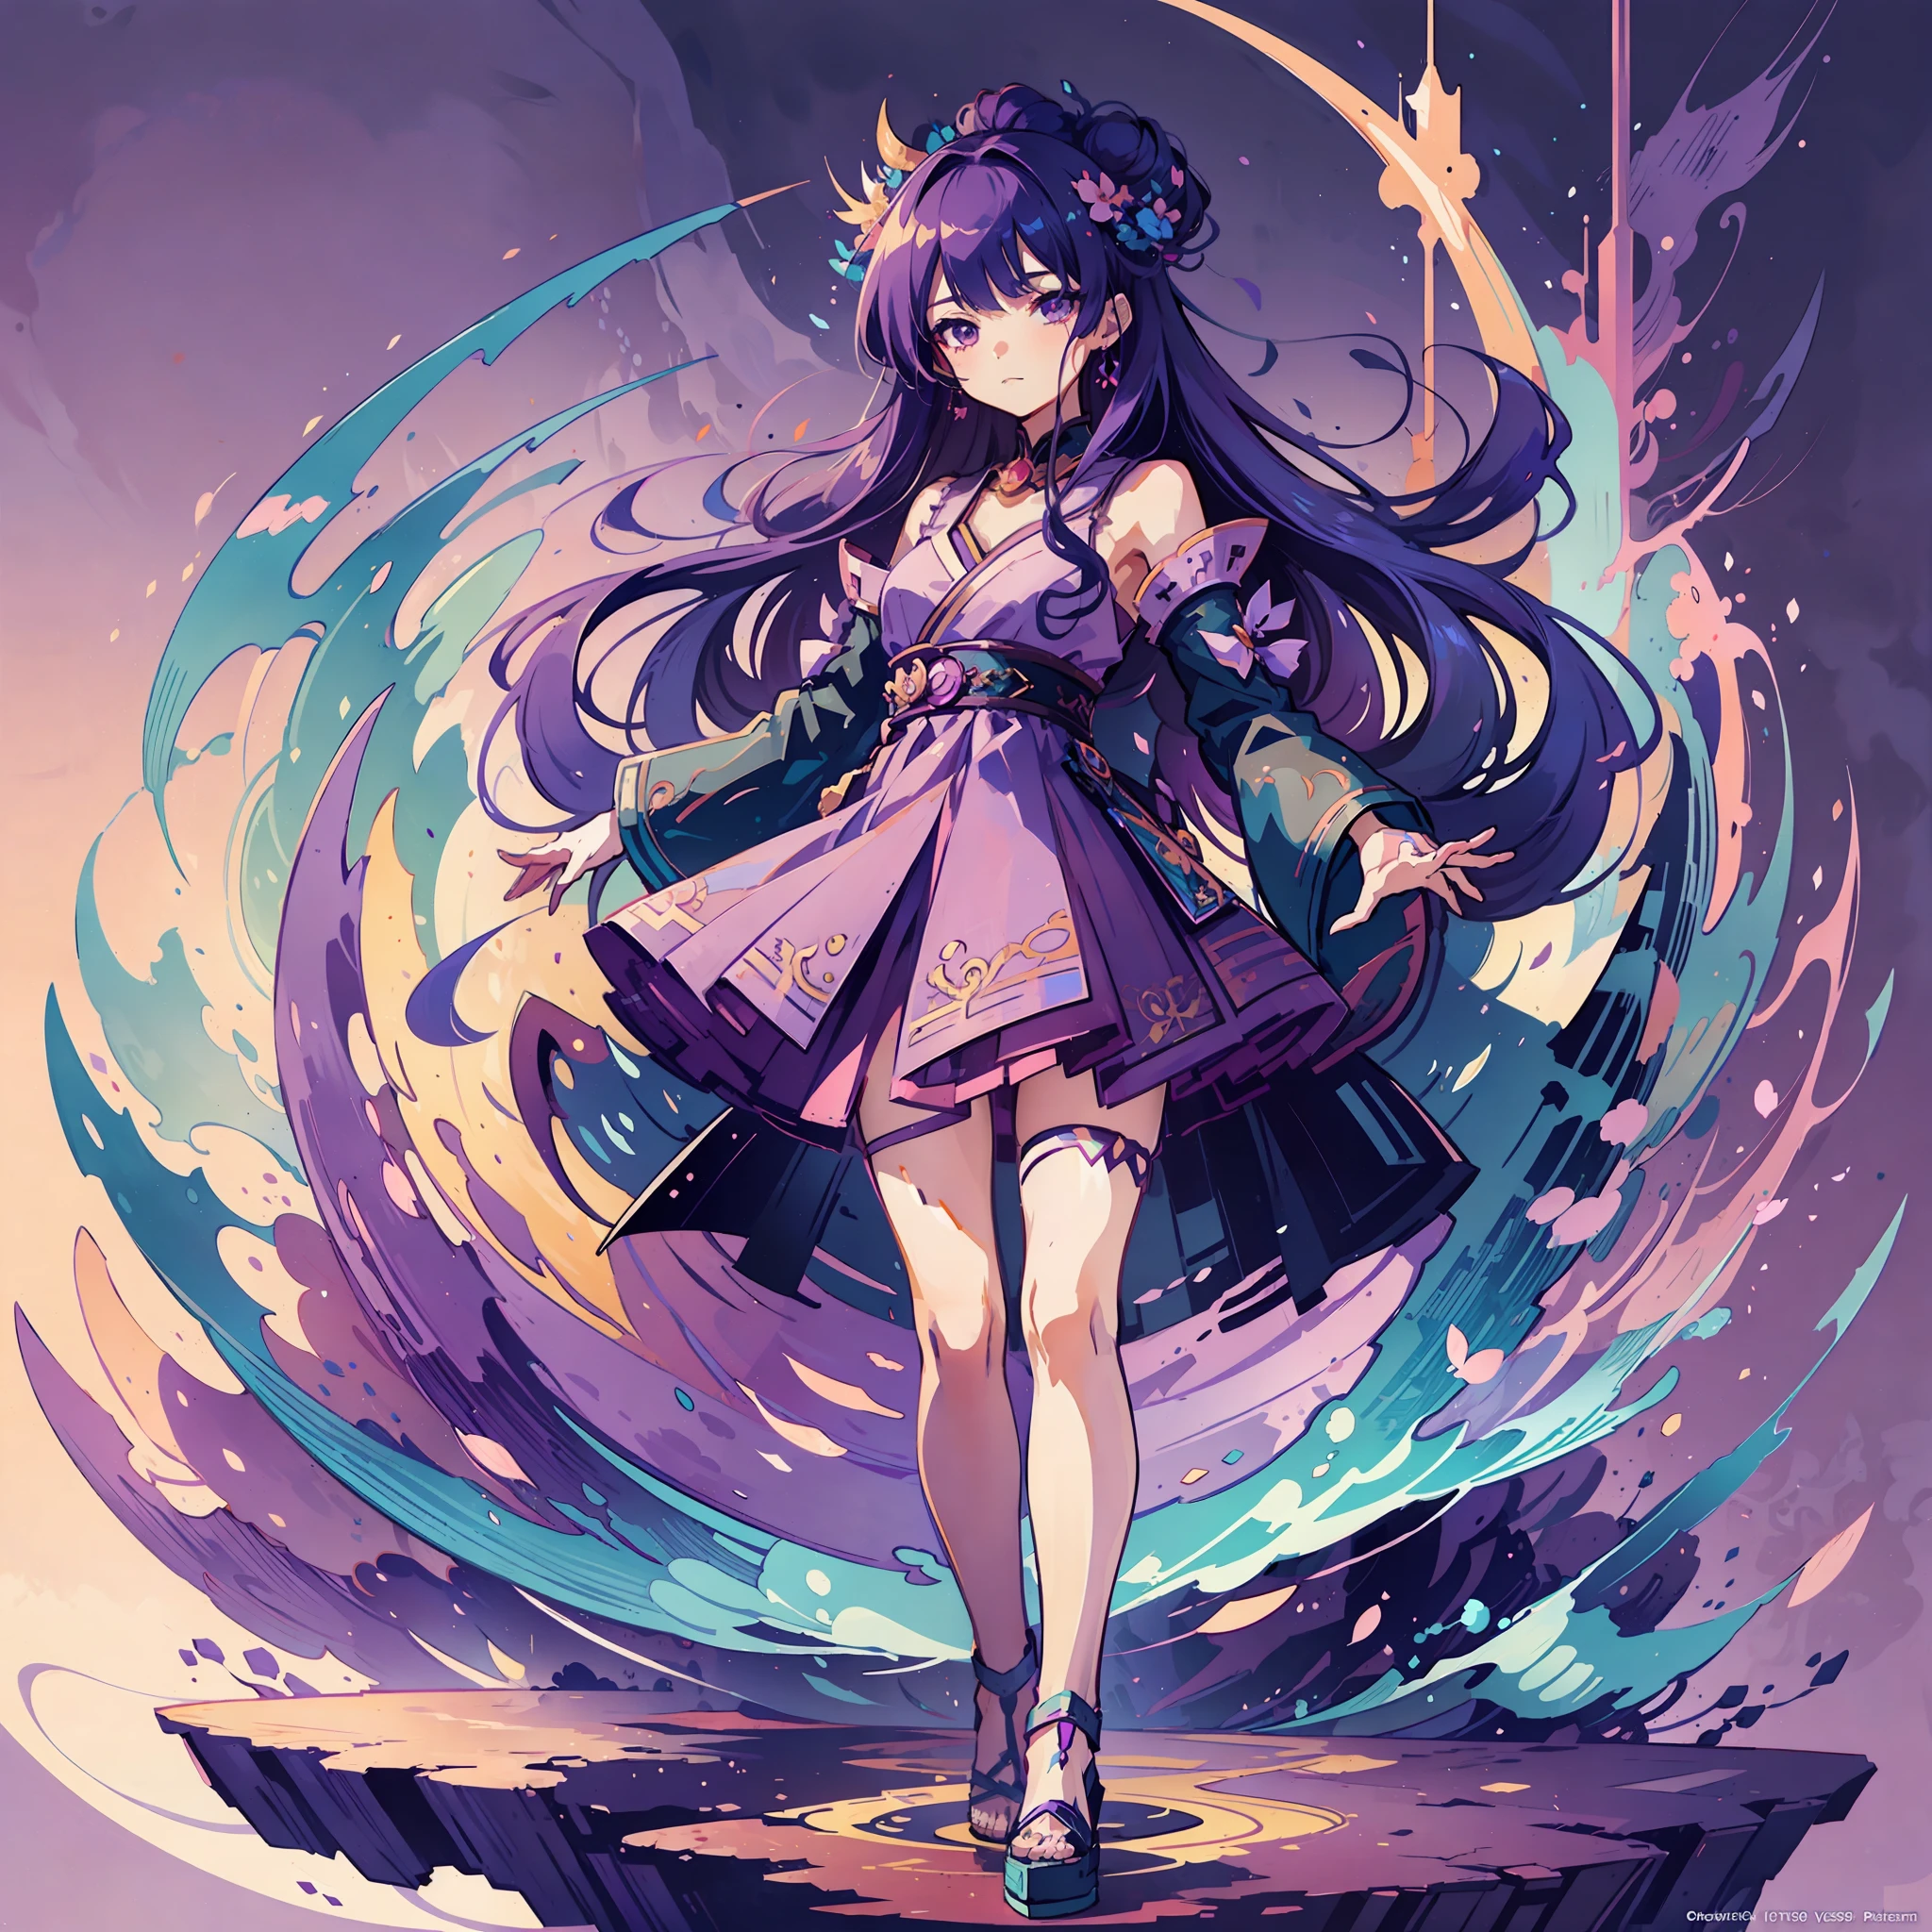 flat ilustration anime girl with long purple hair wearing a purple dress and a tiable, an anime drawing by Kamagurka, pixiv, fantasy art, detailed digital anime art, anime style 4 k, detailed anime art, anime goddess, beautiful anime art style, anime princess, anime moe artstyle, 8k high quality detailed art, detailed anime artwork, anime illustration